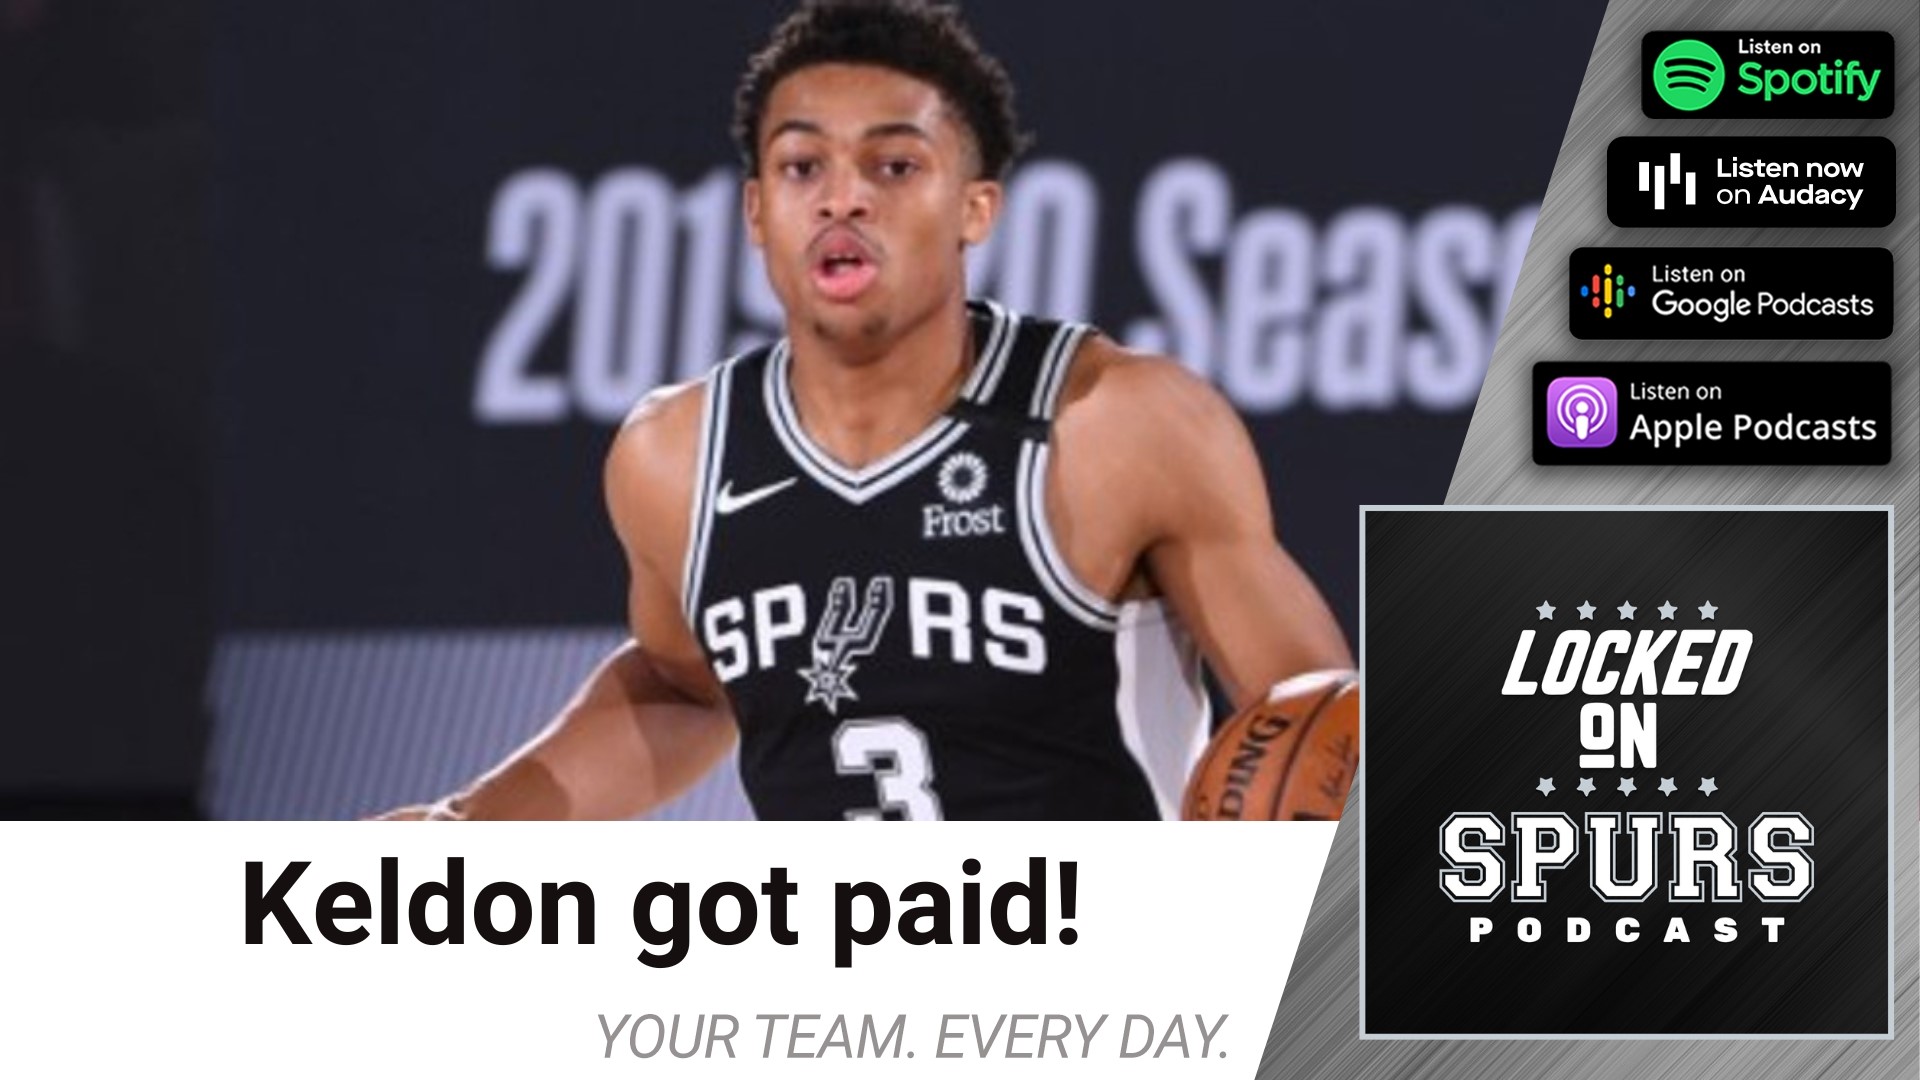 Johnson gets a four-year contract extension with the Spurs.